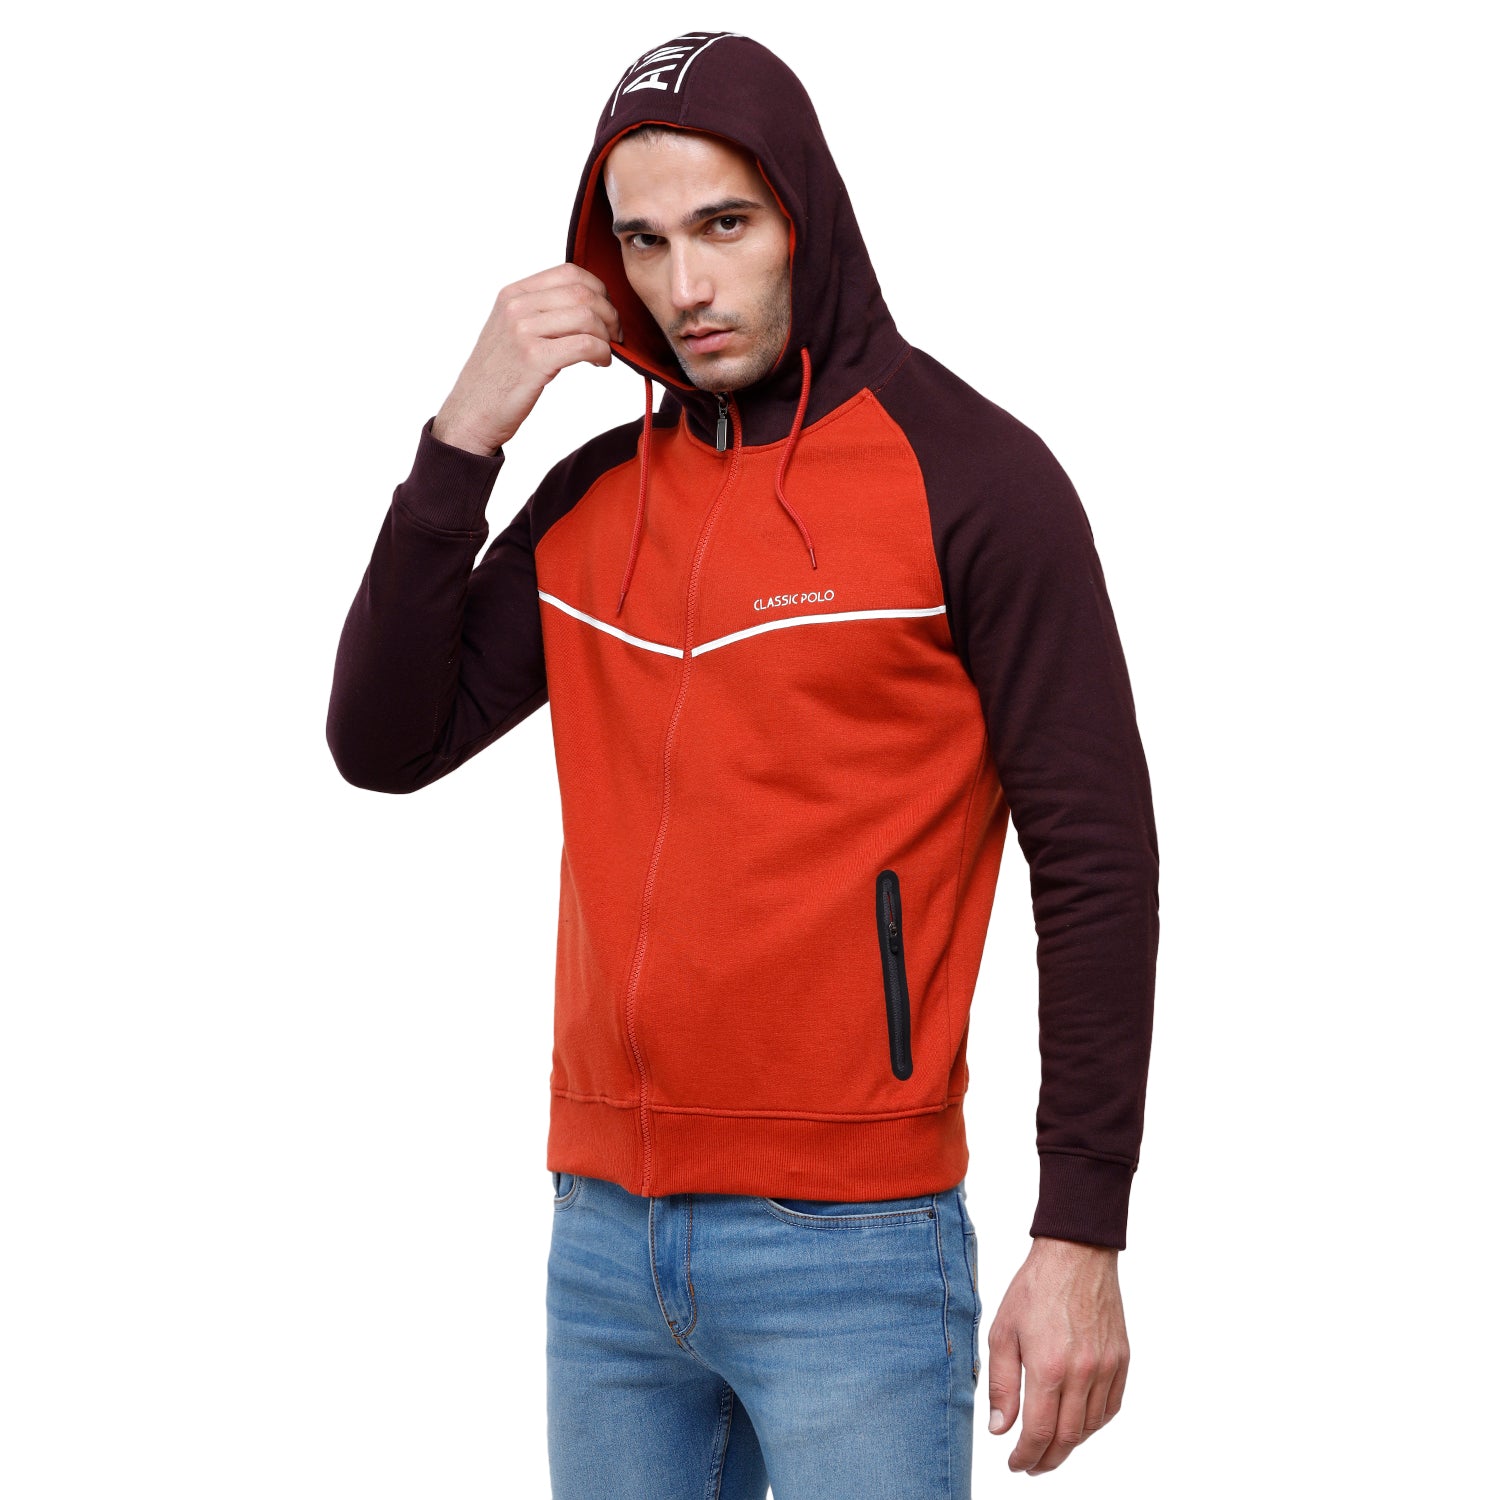 Classic Polo Men's Color Block Full Sleeve Red & Black Hooded Sweat Shirt - CPSS-331B Sweat Shirts Classic Polo 